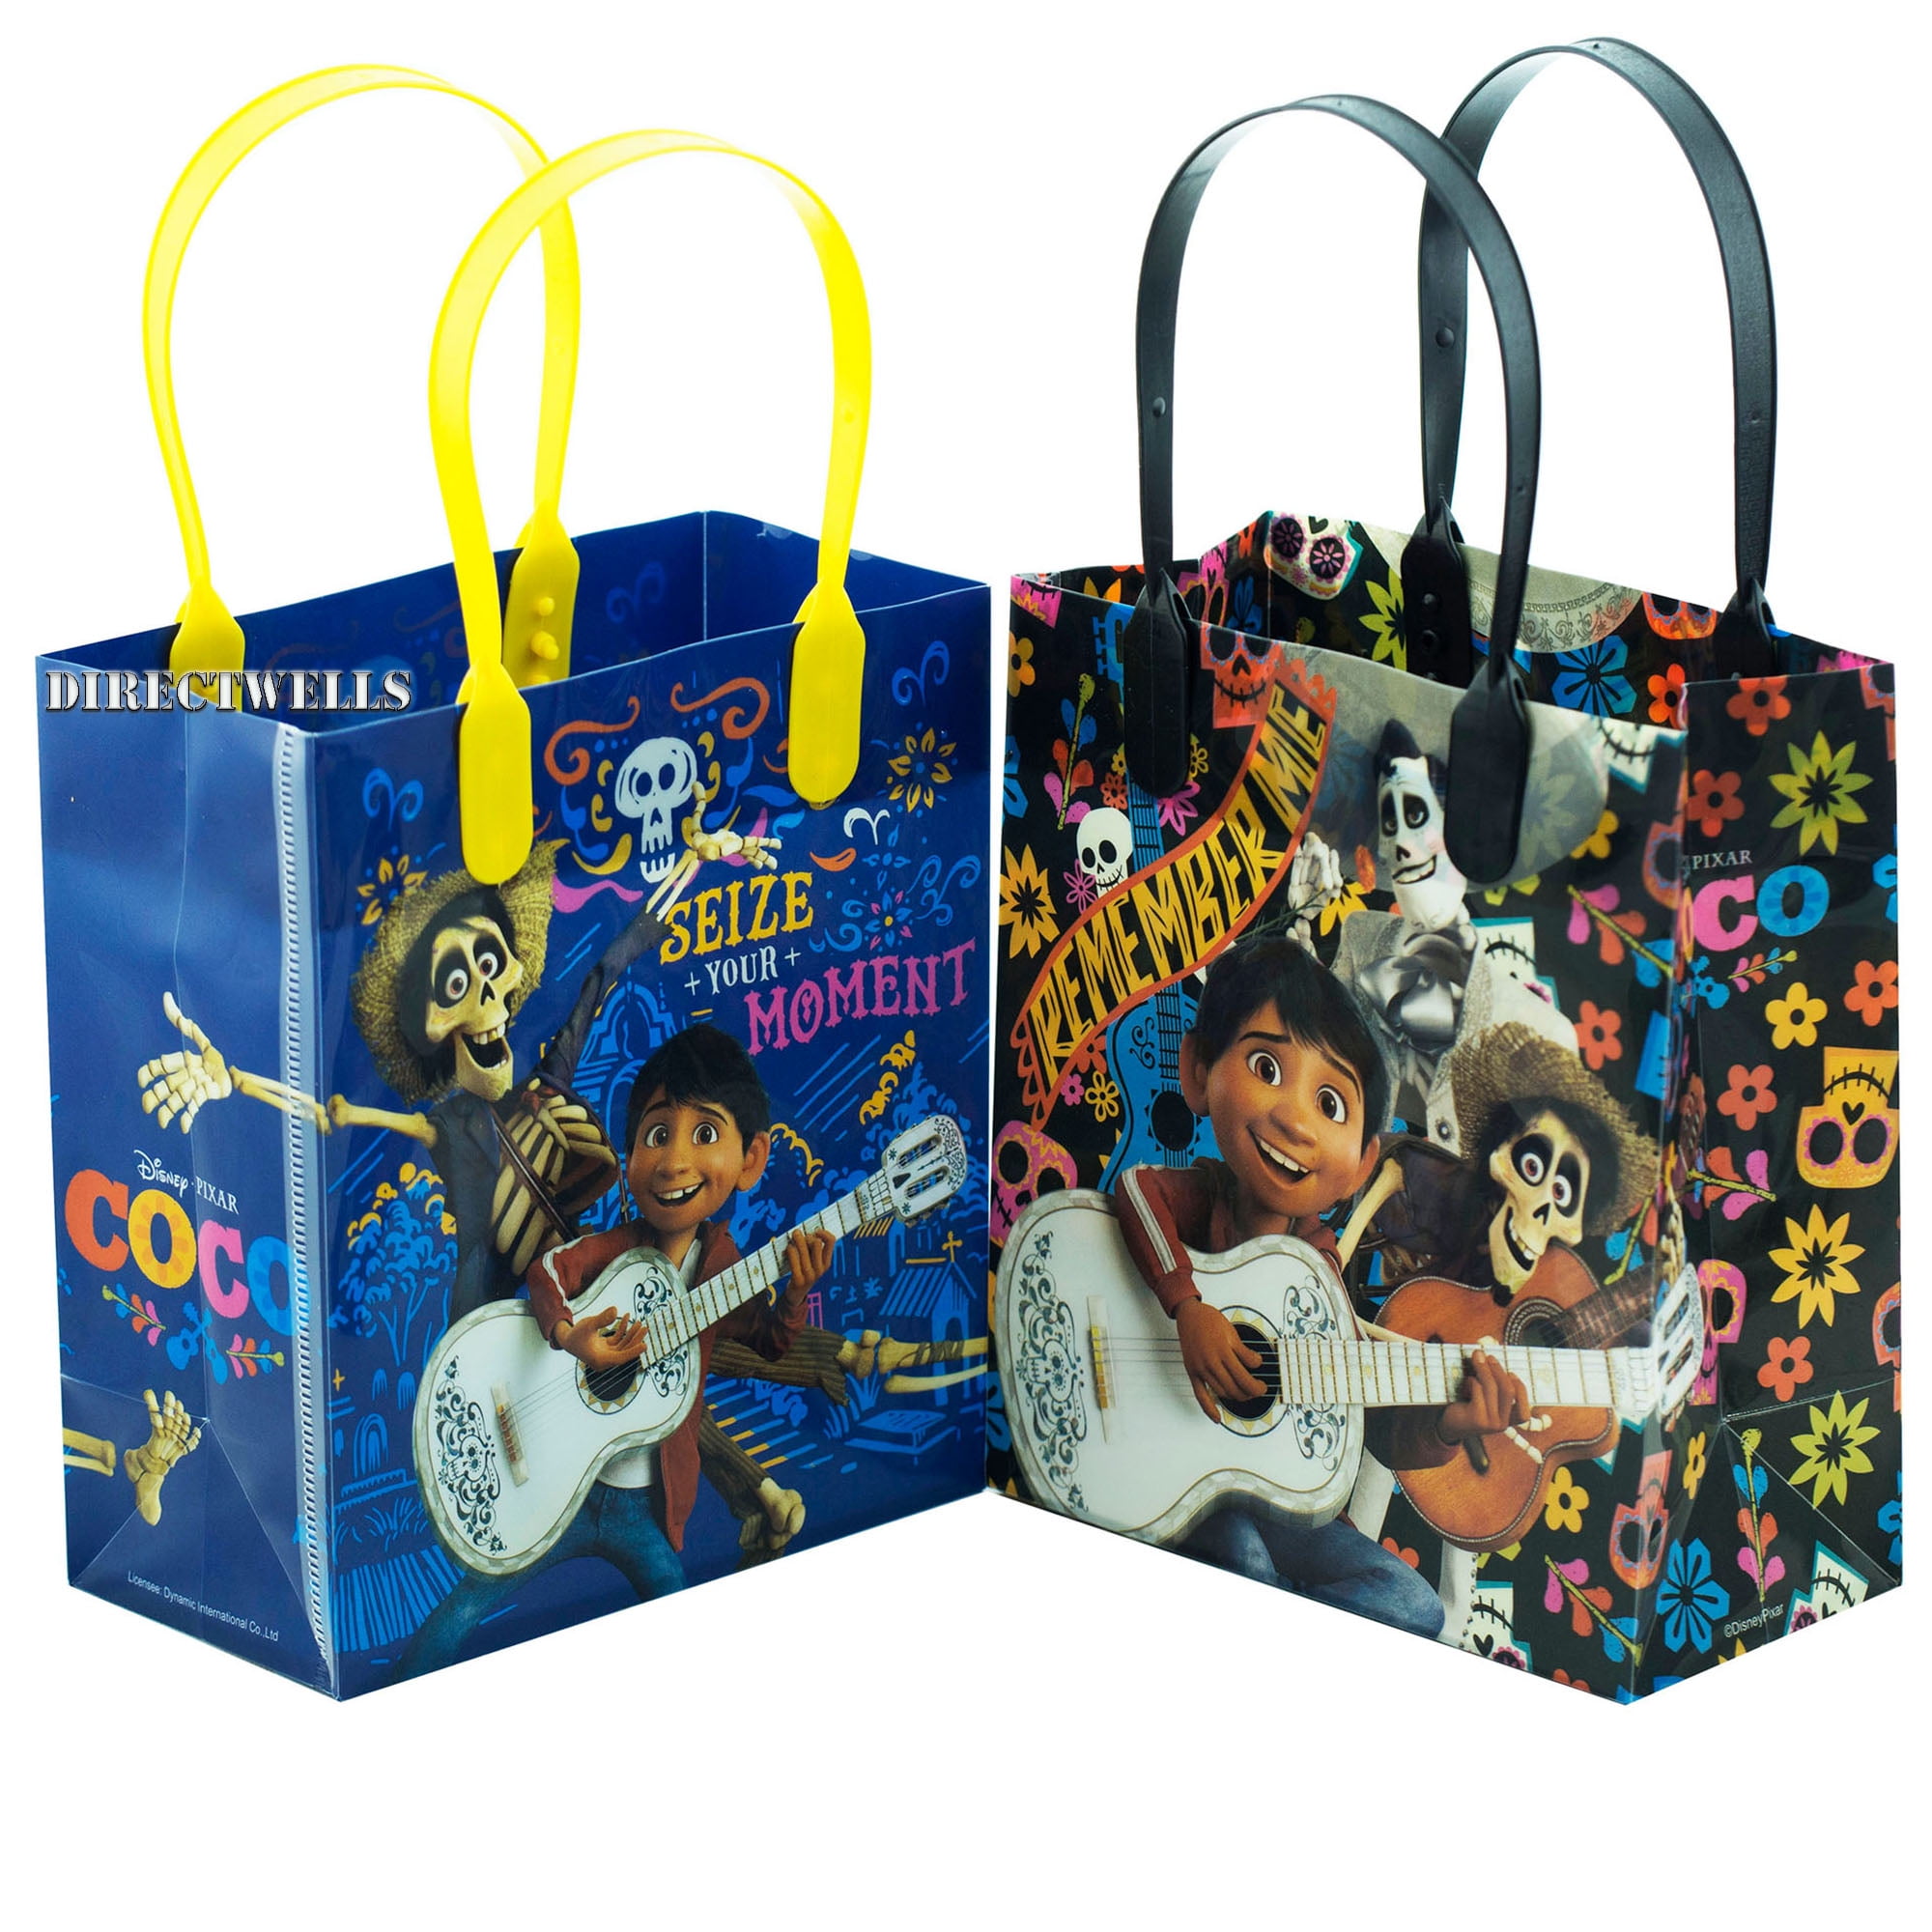 Disney Coco Seize Your Moment 12 Party Favor Reusable Goodie Small Gift Bags